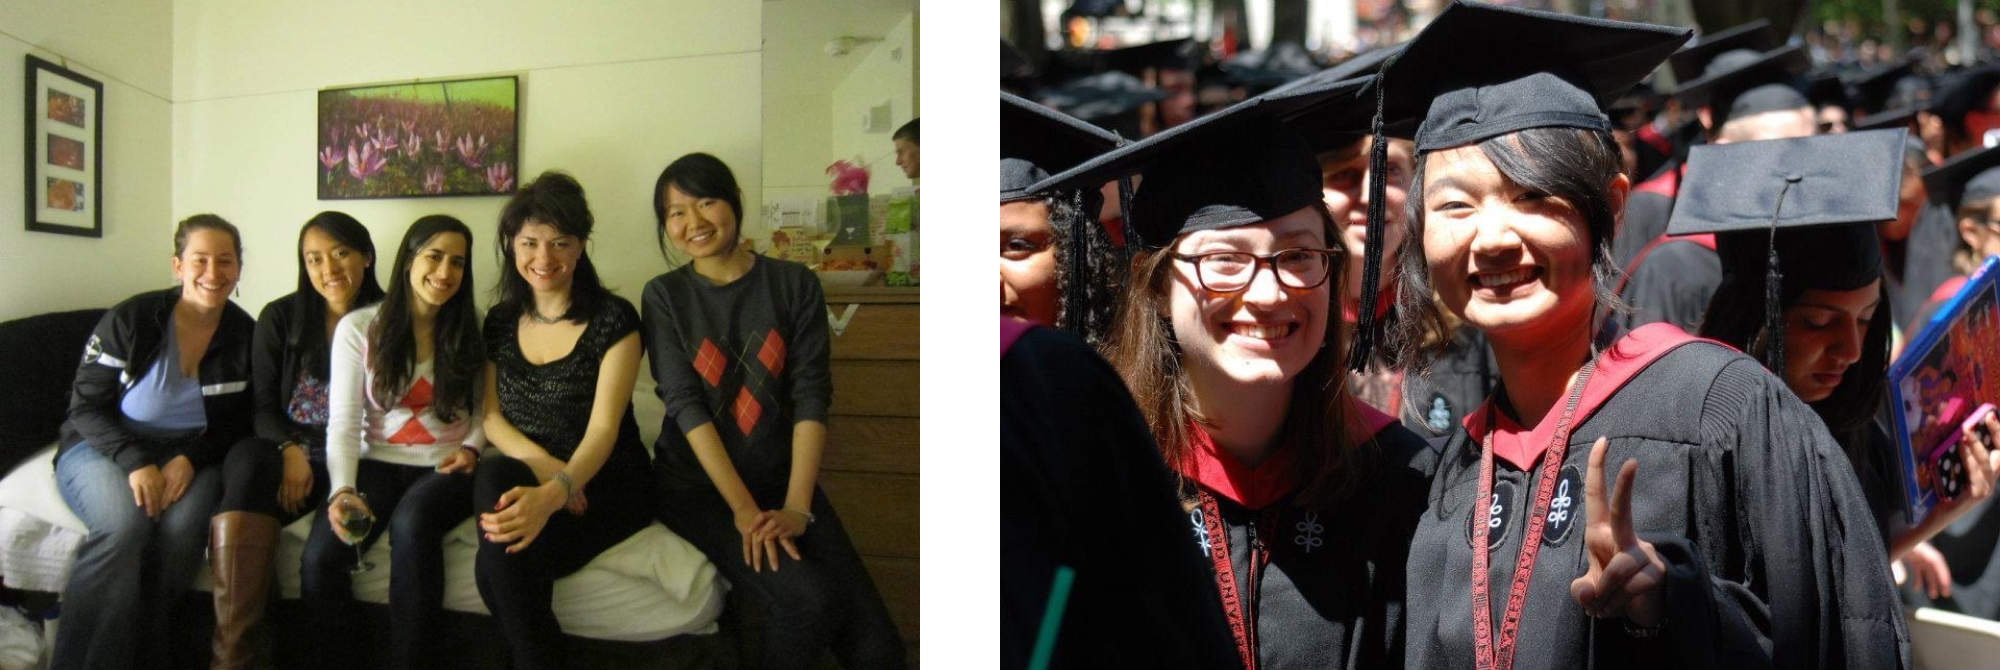 Two photos, Jing Jing with friends in both. Right photos shows Jing Jing at her Harvard graduation in cap and gown.